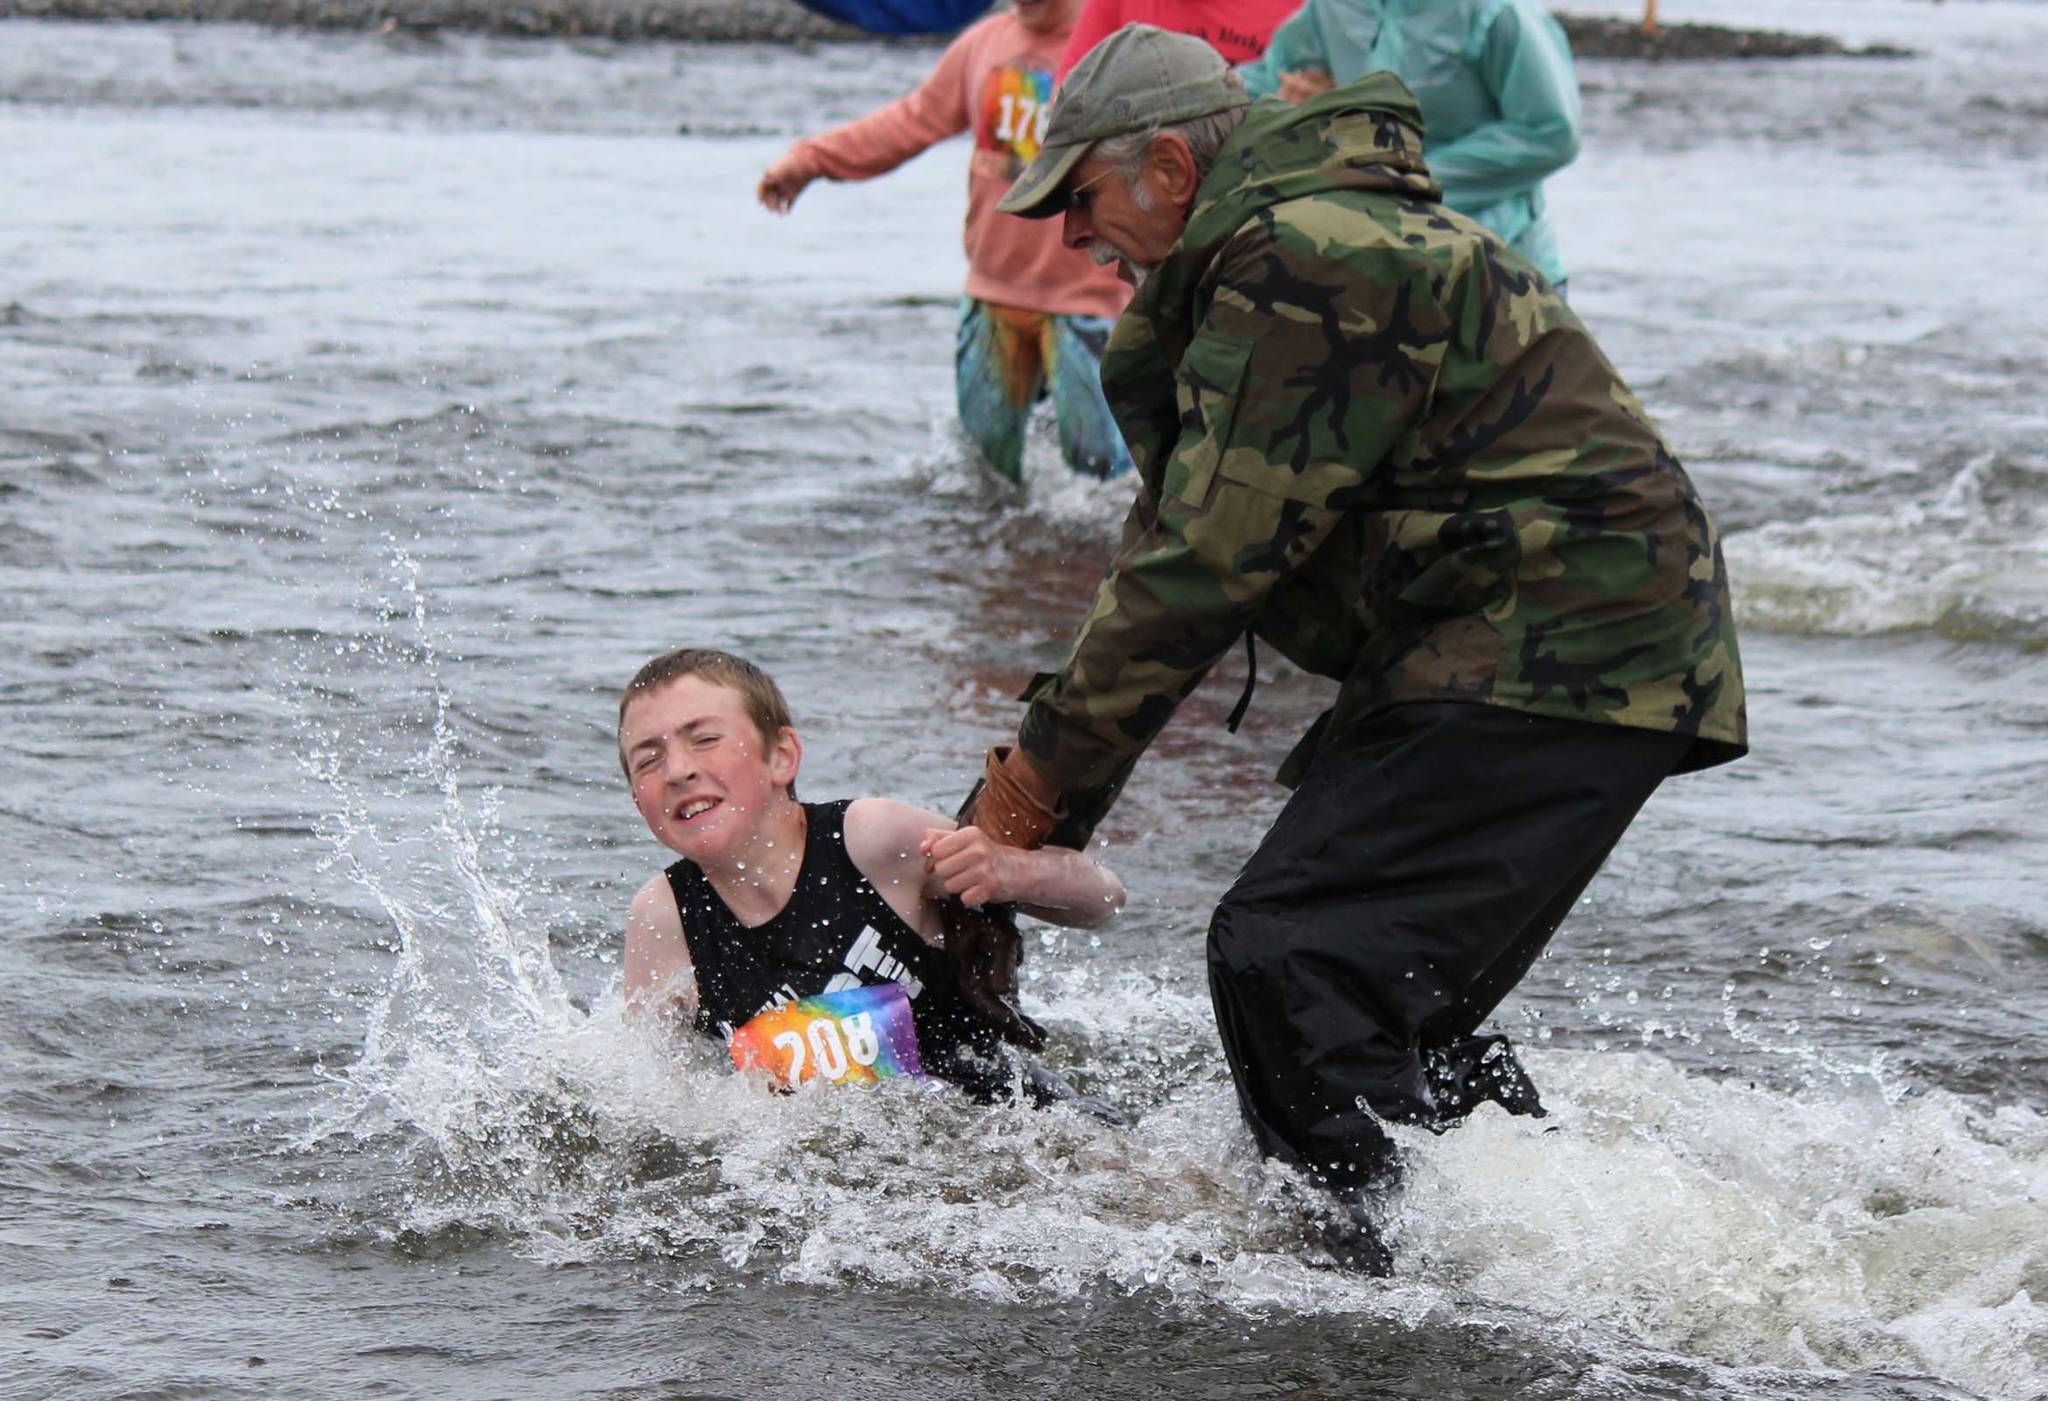 A cold-water stumble doesn’t slow runner Kael Aamodt, 111, thanks to a little help from a race volunteer during the Clam Scramble held Saturday, June 15, 2019 in Ninilchik, Alaska. (Photo by McKibben Jackinsky)